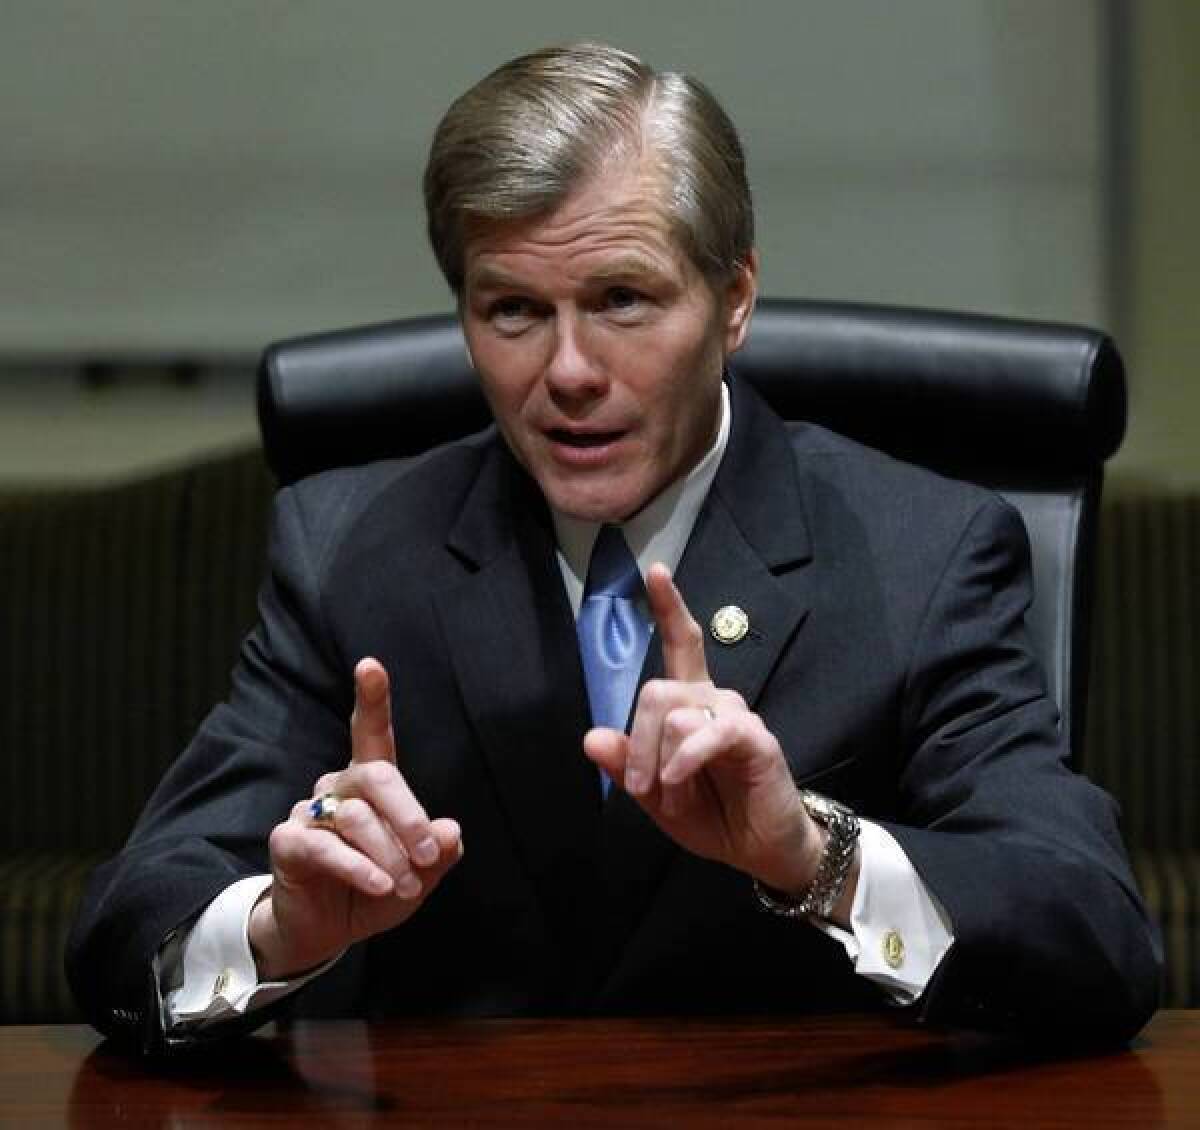 "Friendly competition is just good for states," said Virginia Gov. Bob McDonnell, who is visiting California to woo employers.